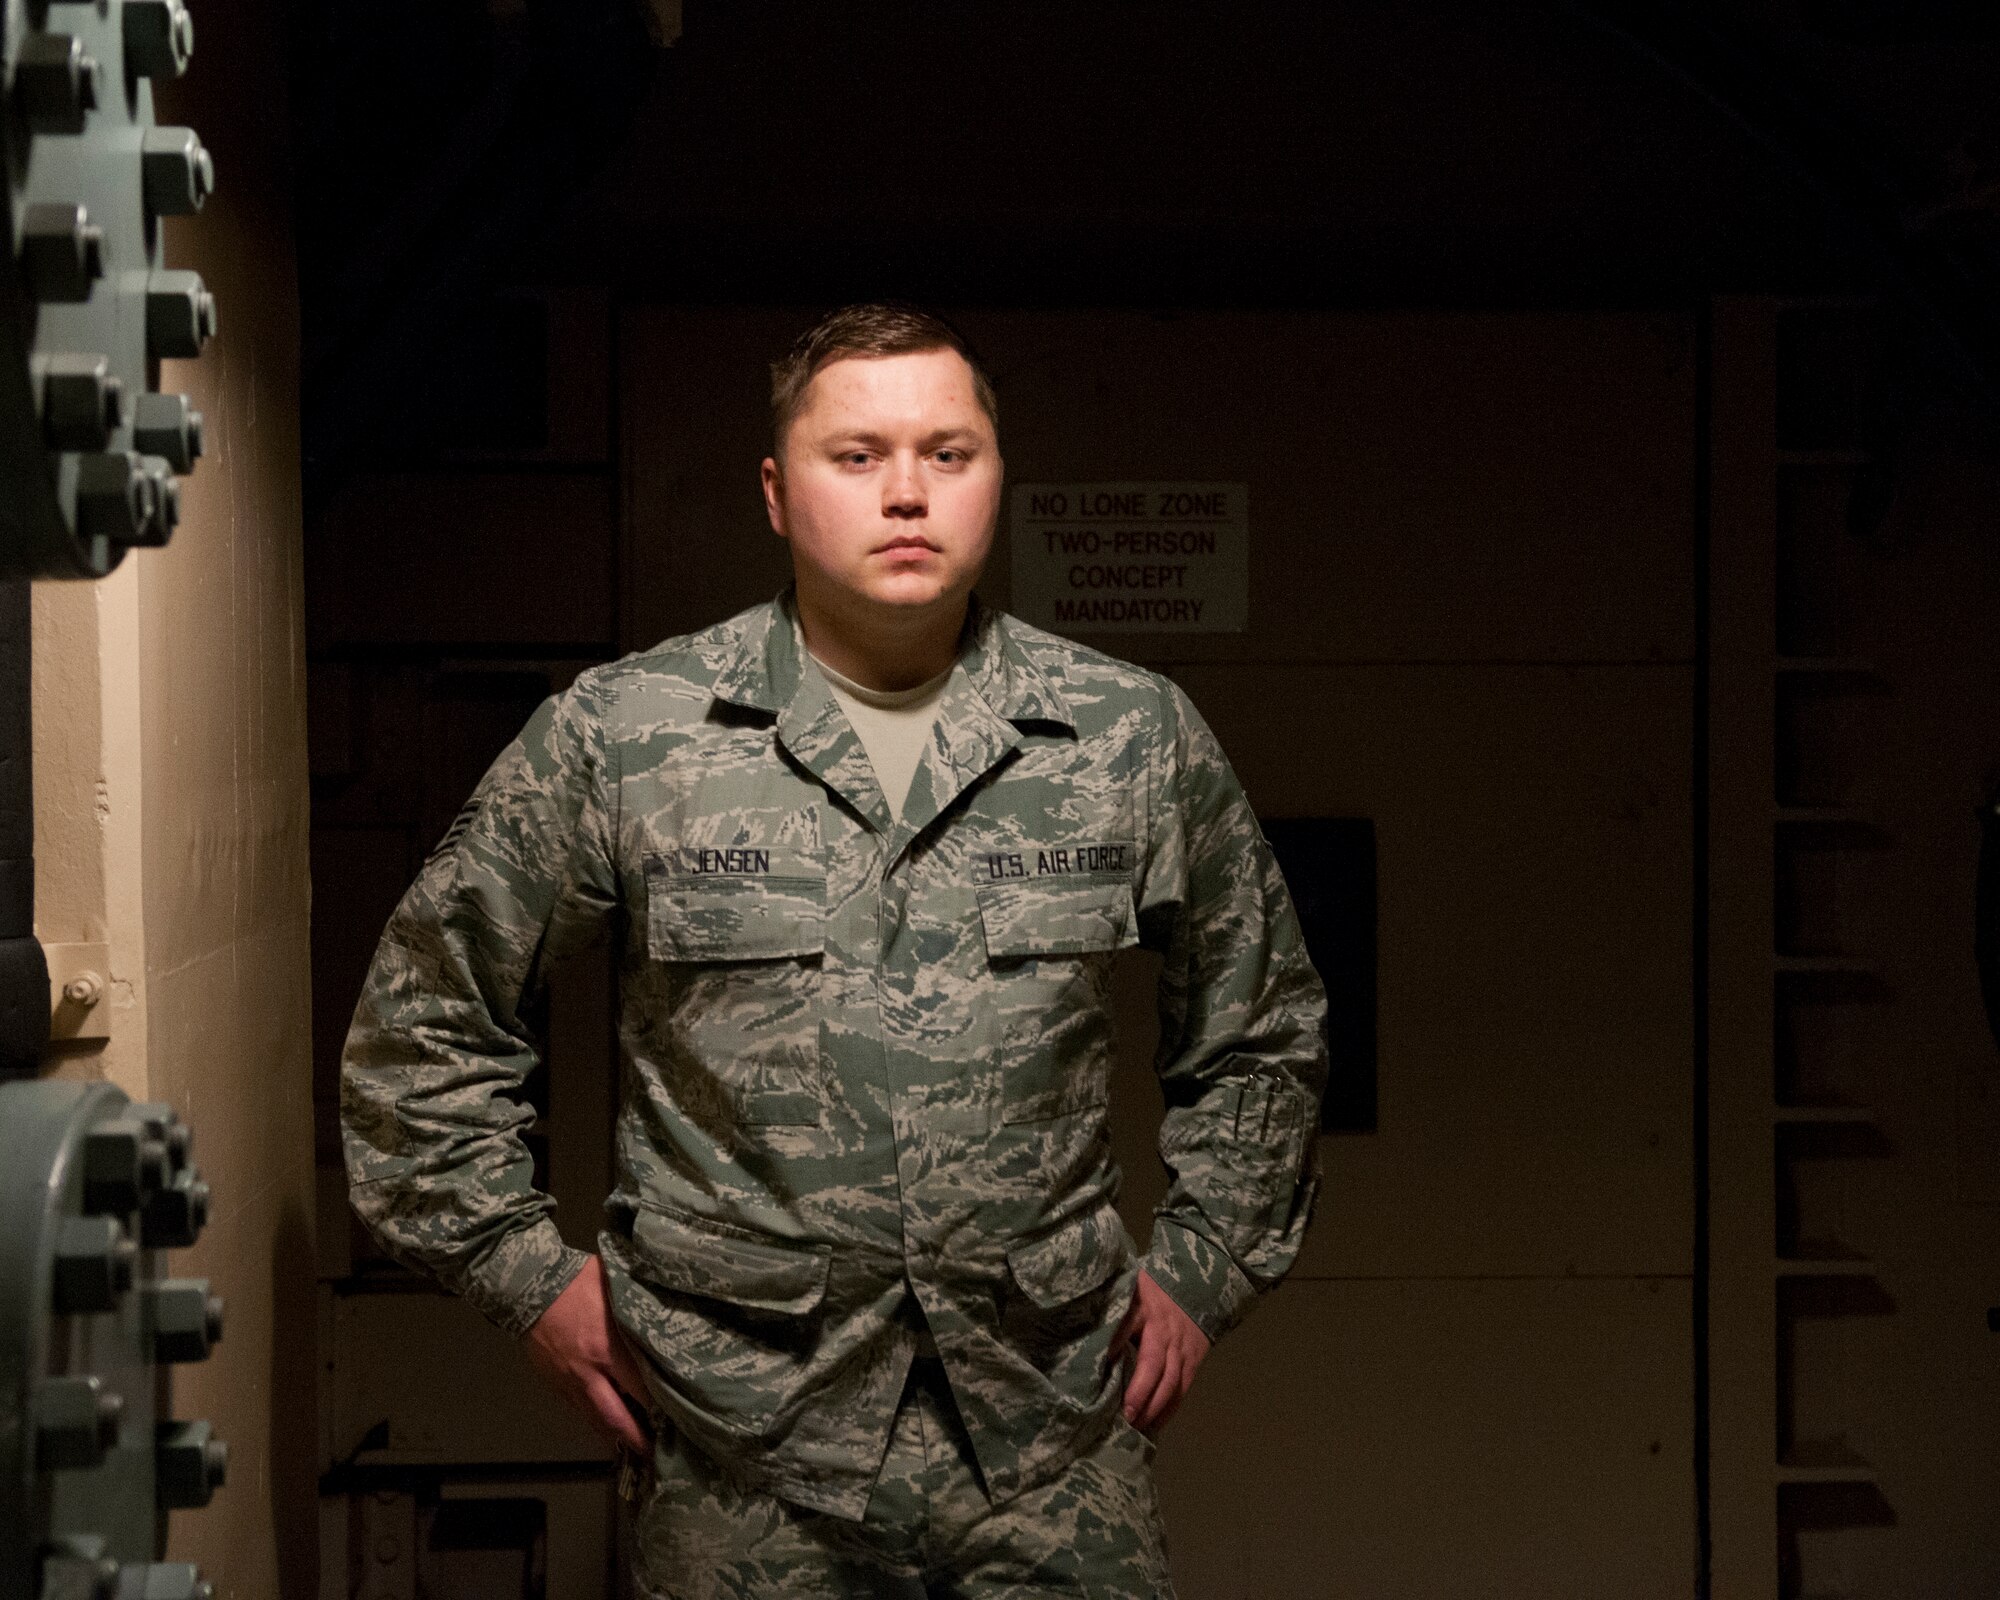 Staff Sgt. Jerimiah Jensen, 320th Missile Squadron facility manager, poses for a portrait in the tunnel junction of a missile alert facility belonging to F.E. Warren Air Force Base, Jan. 28, 2016. Facility managers keep missile alert facilities in operation order for the nuclear deterrent mission. (U.S. Air Force photo by Lan Kim)